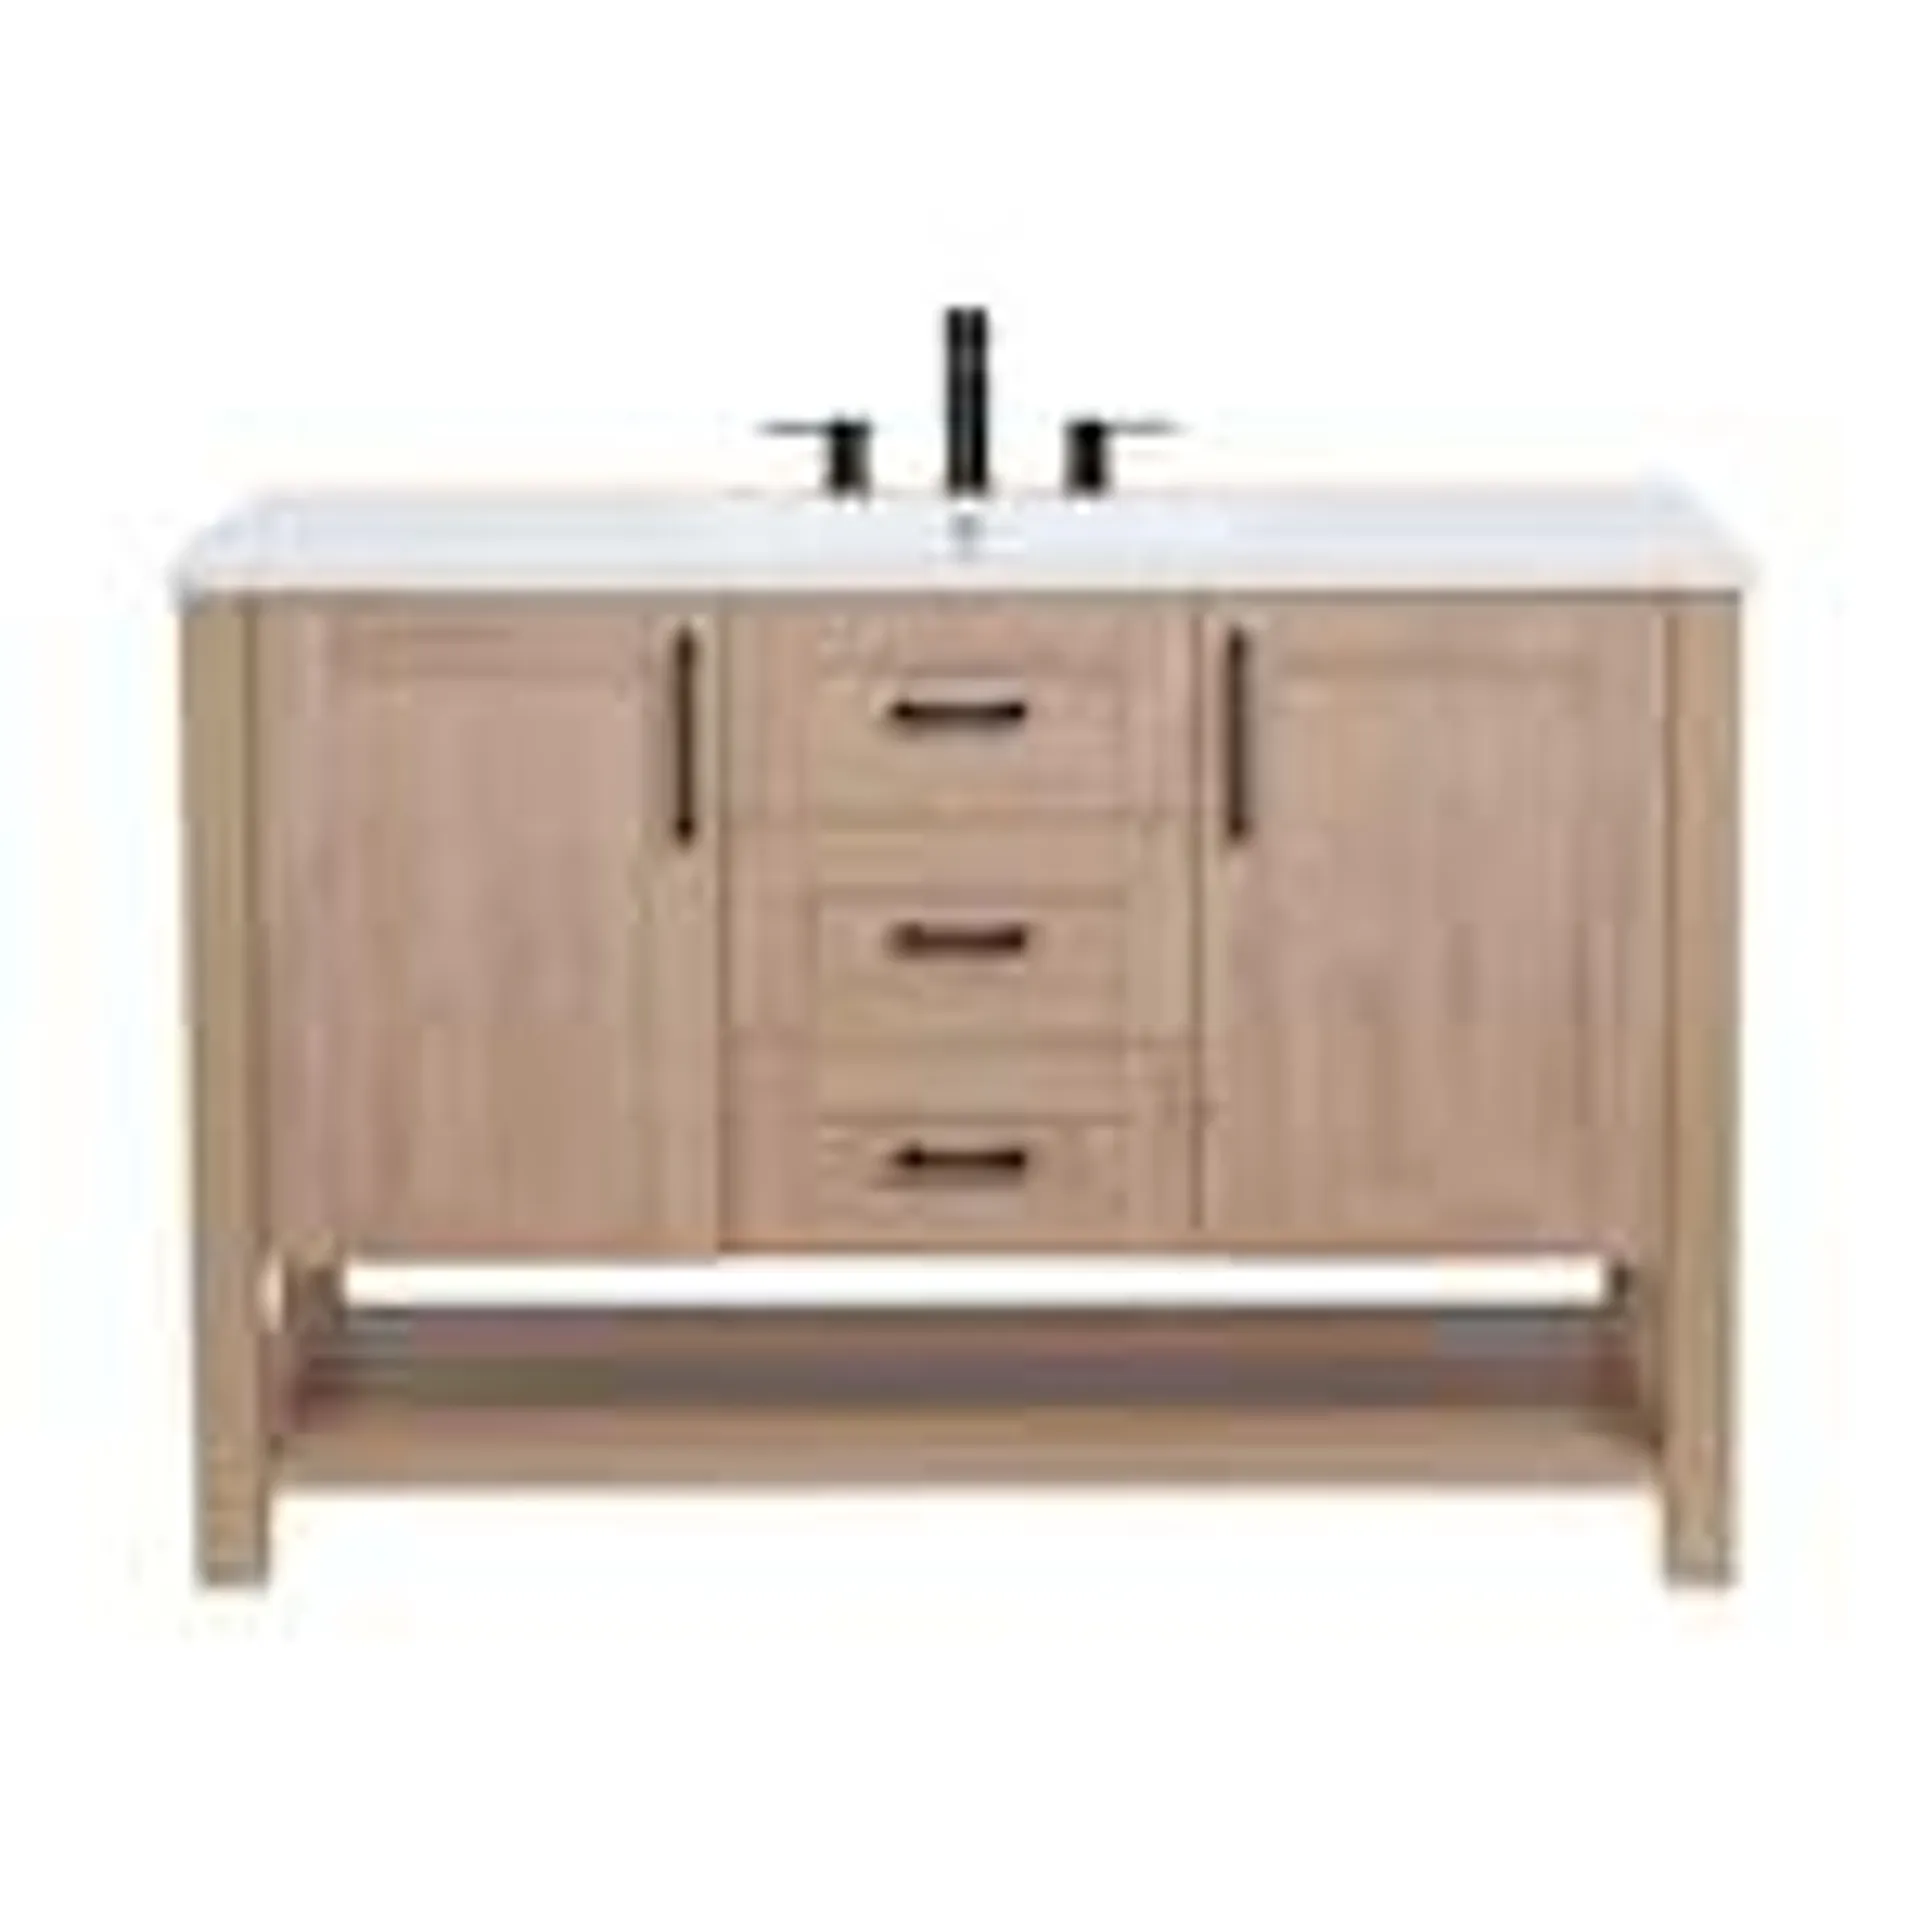 BOSSY Freestanding 49 inch Vanity, 2 Doors, 3 Drawers, with Sink MOD 4922-8-107S, Predrilled for a 8 inch Faucet